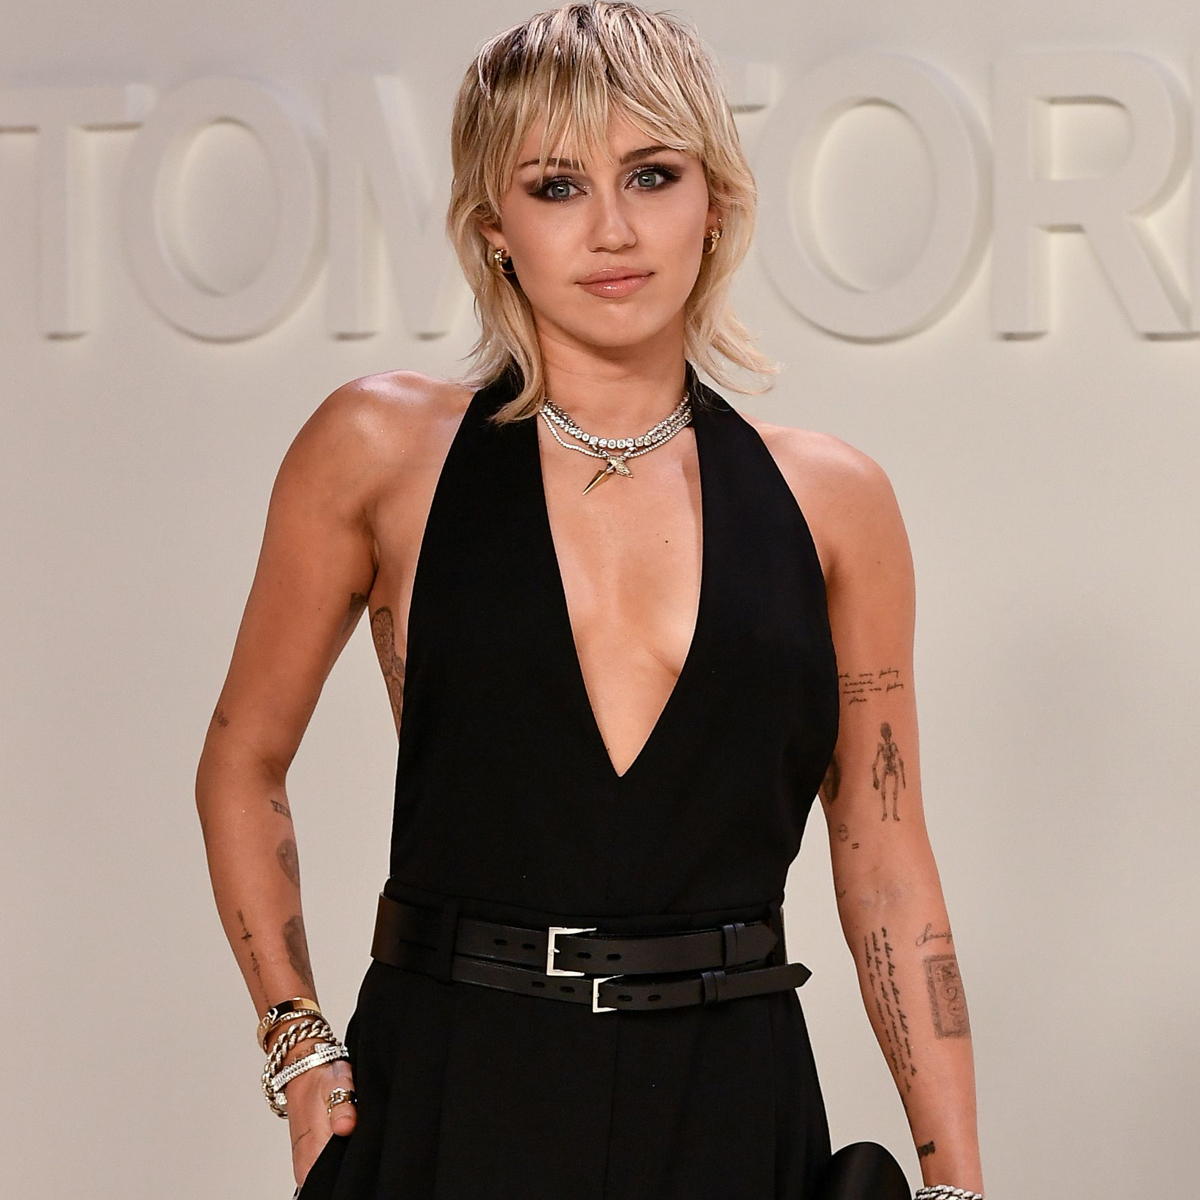 Disney Lesbian Porn Miley Cyrus - Miley Cyrus News, Pictures, and Videos - E! Online